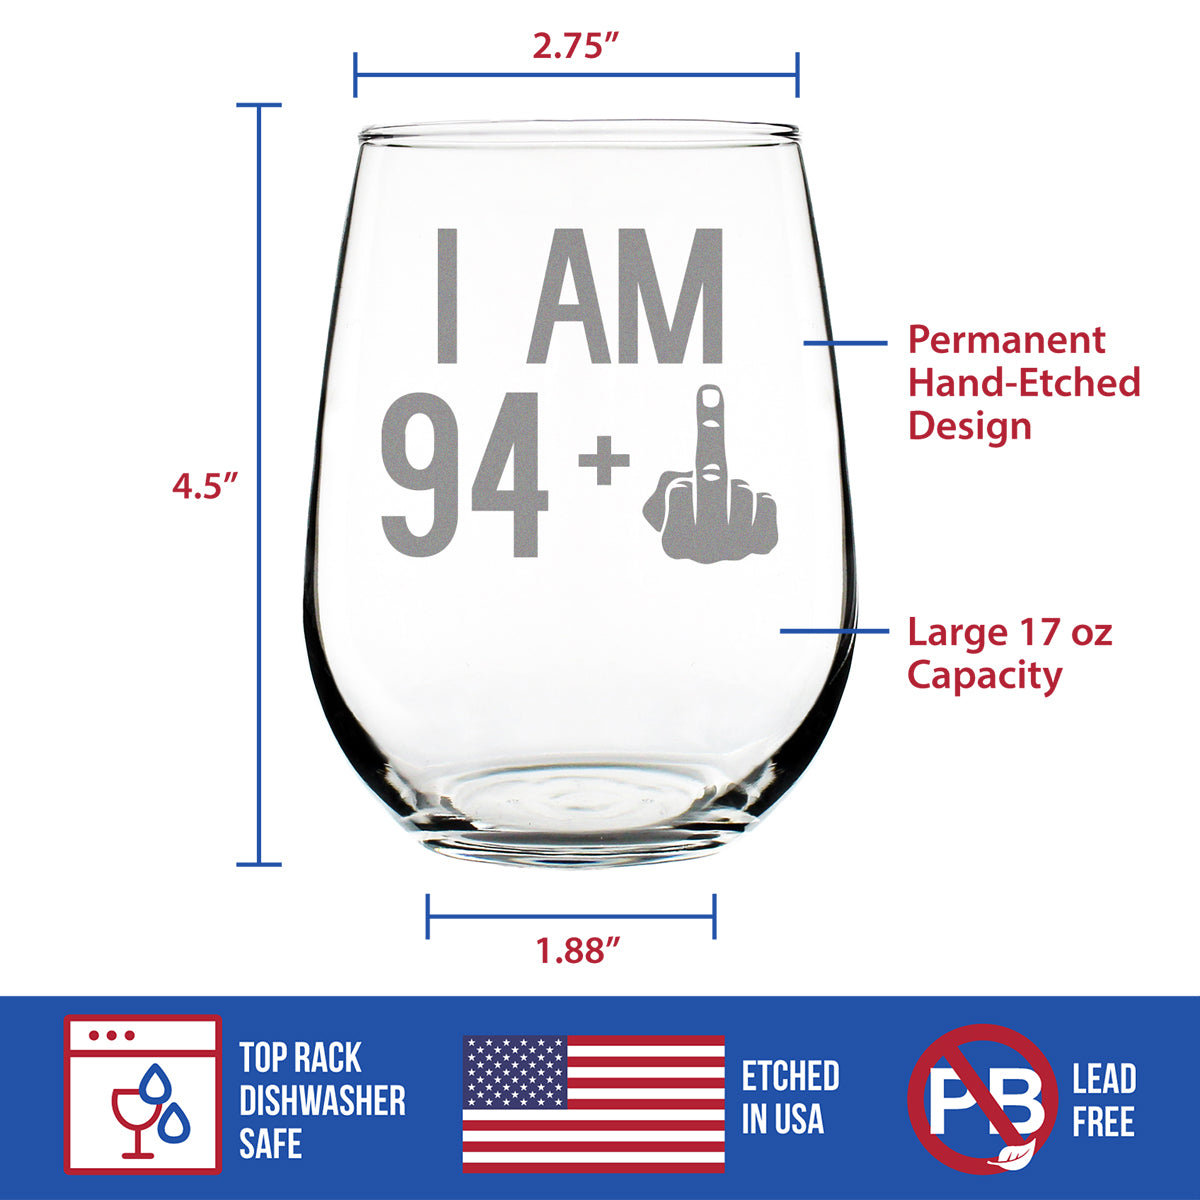 94 + 1 Middle Finger - 17 Ounce Stemless Wine Glass